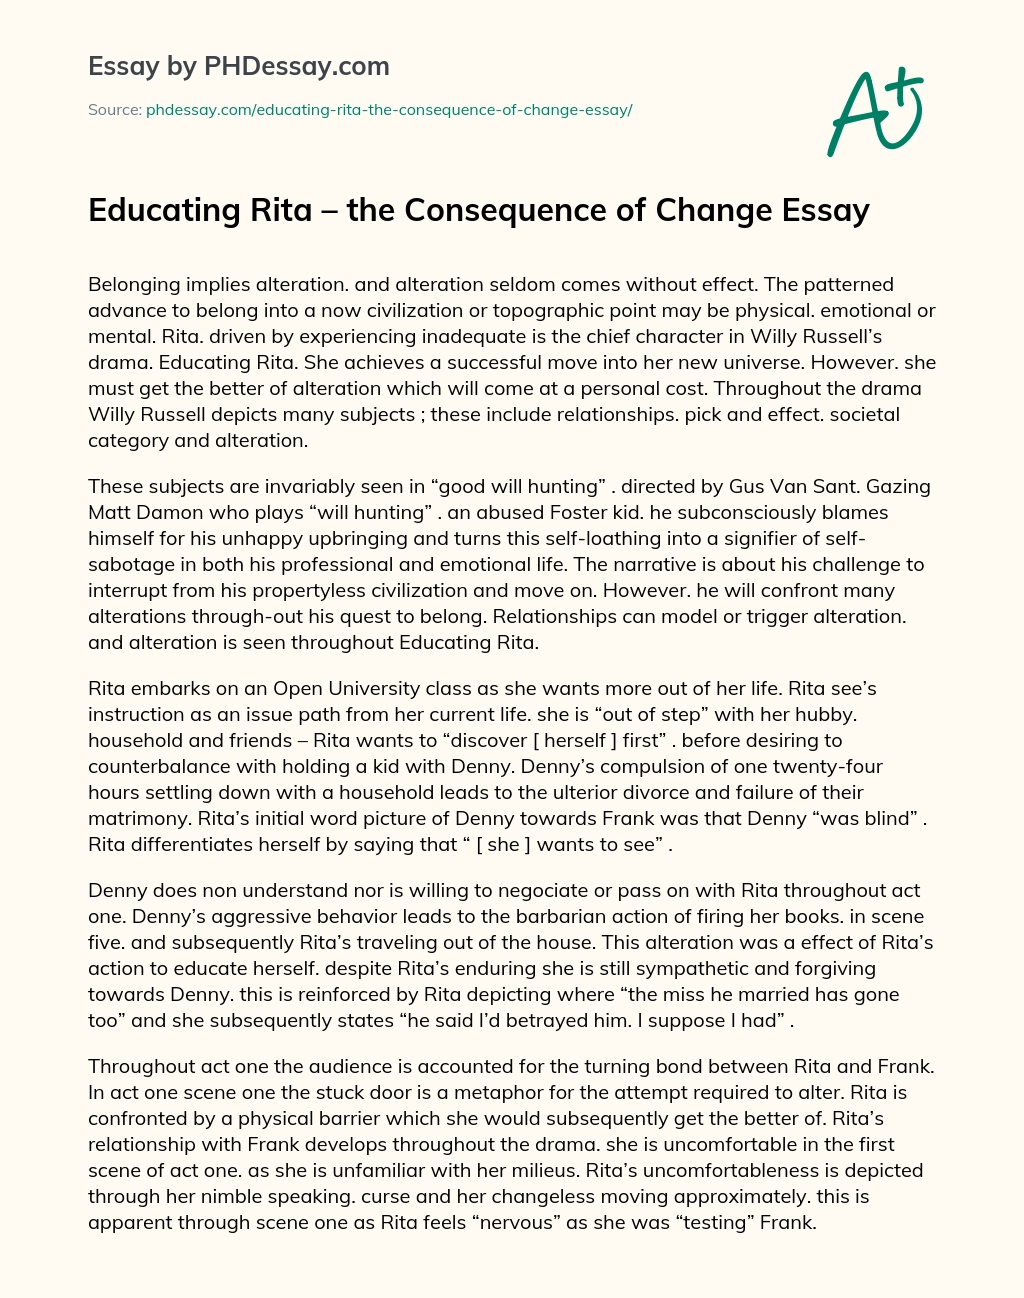 Educating Rita – the Consequence of Change Essay essay